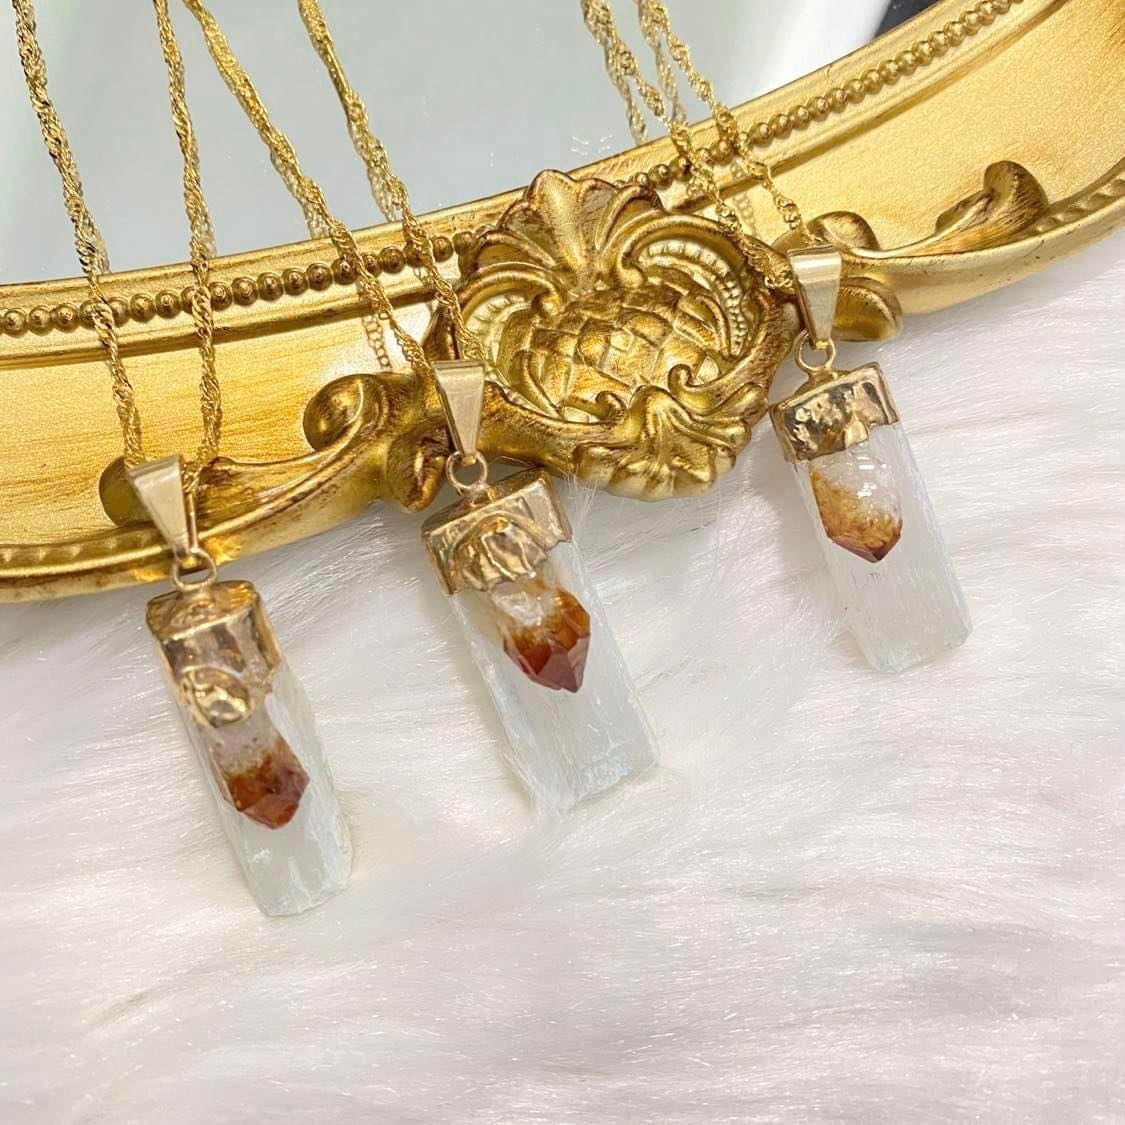 Raw Selenite Crystal Necklace with 18k Gold Dipped Chain